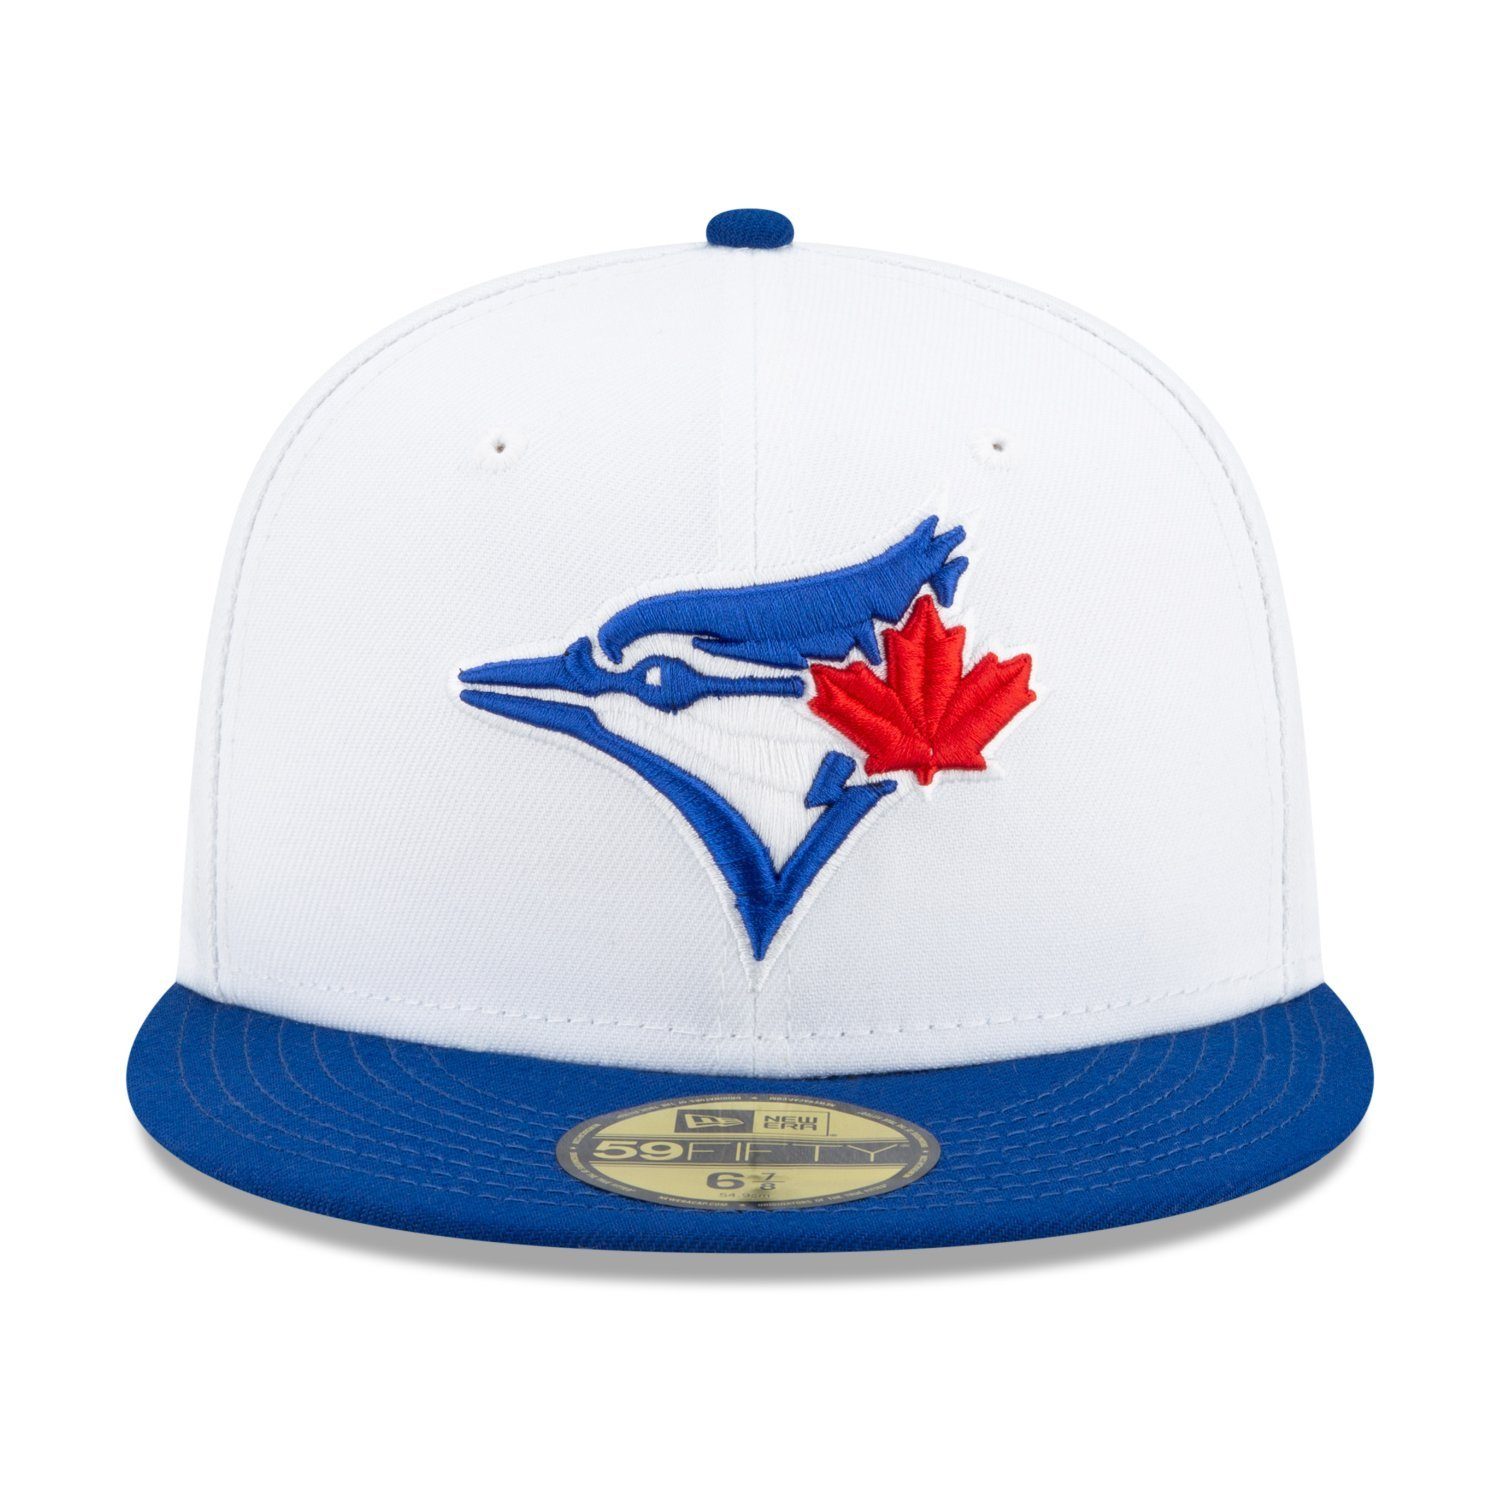 New Era Fitted Cap WORLD Toronto 1993 59Fifty Jays SERIES